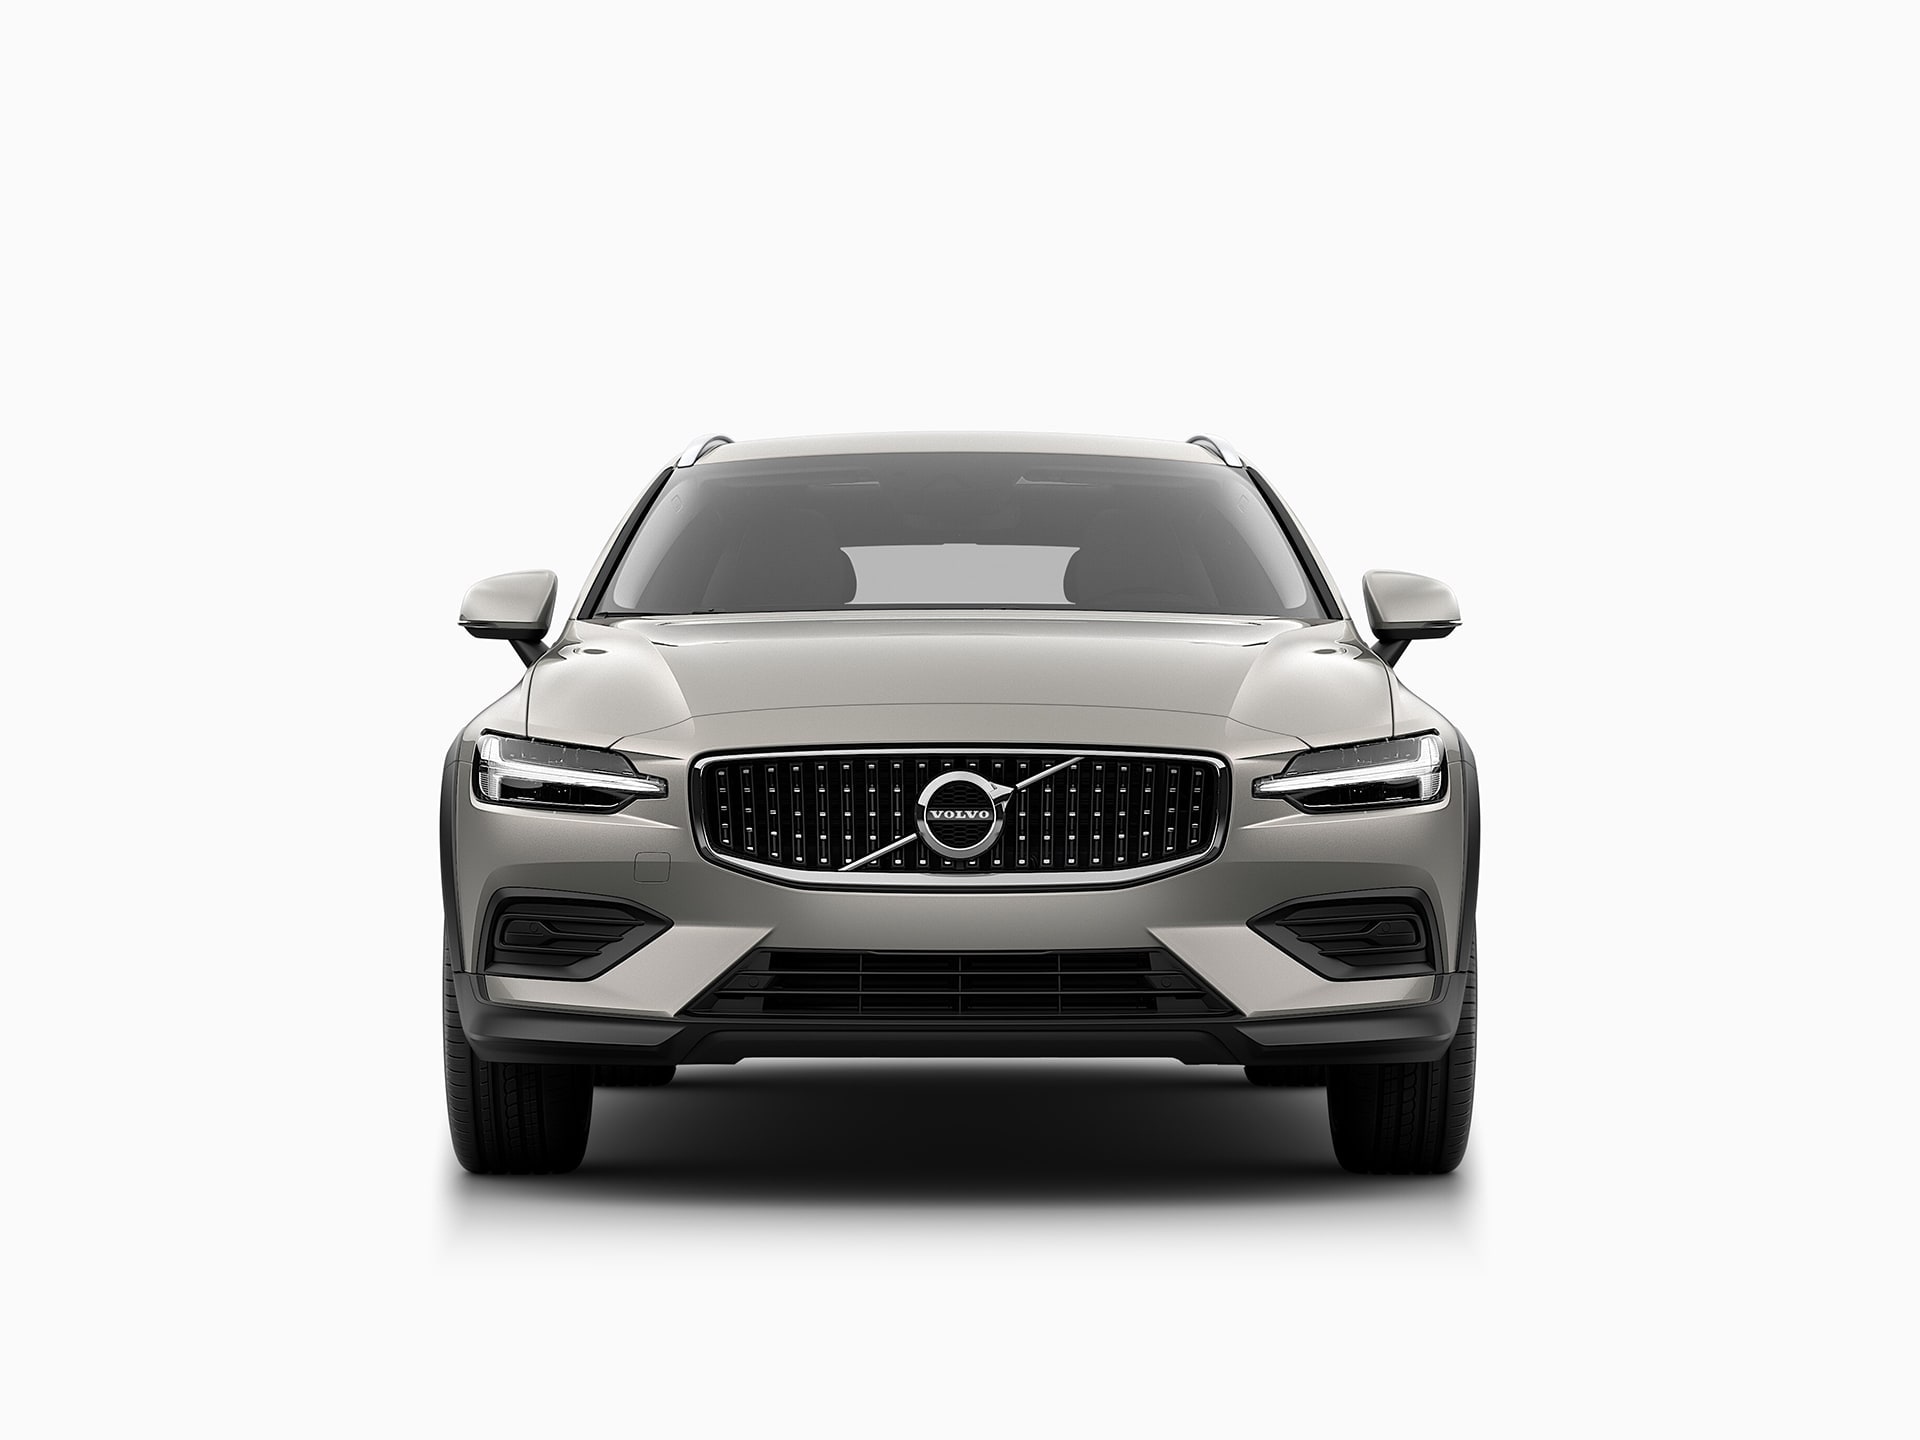 The front of a Volvo V60 Cross Country.